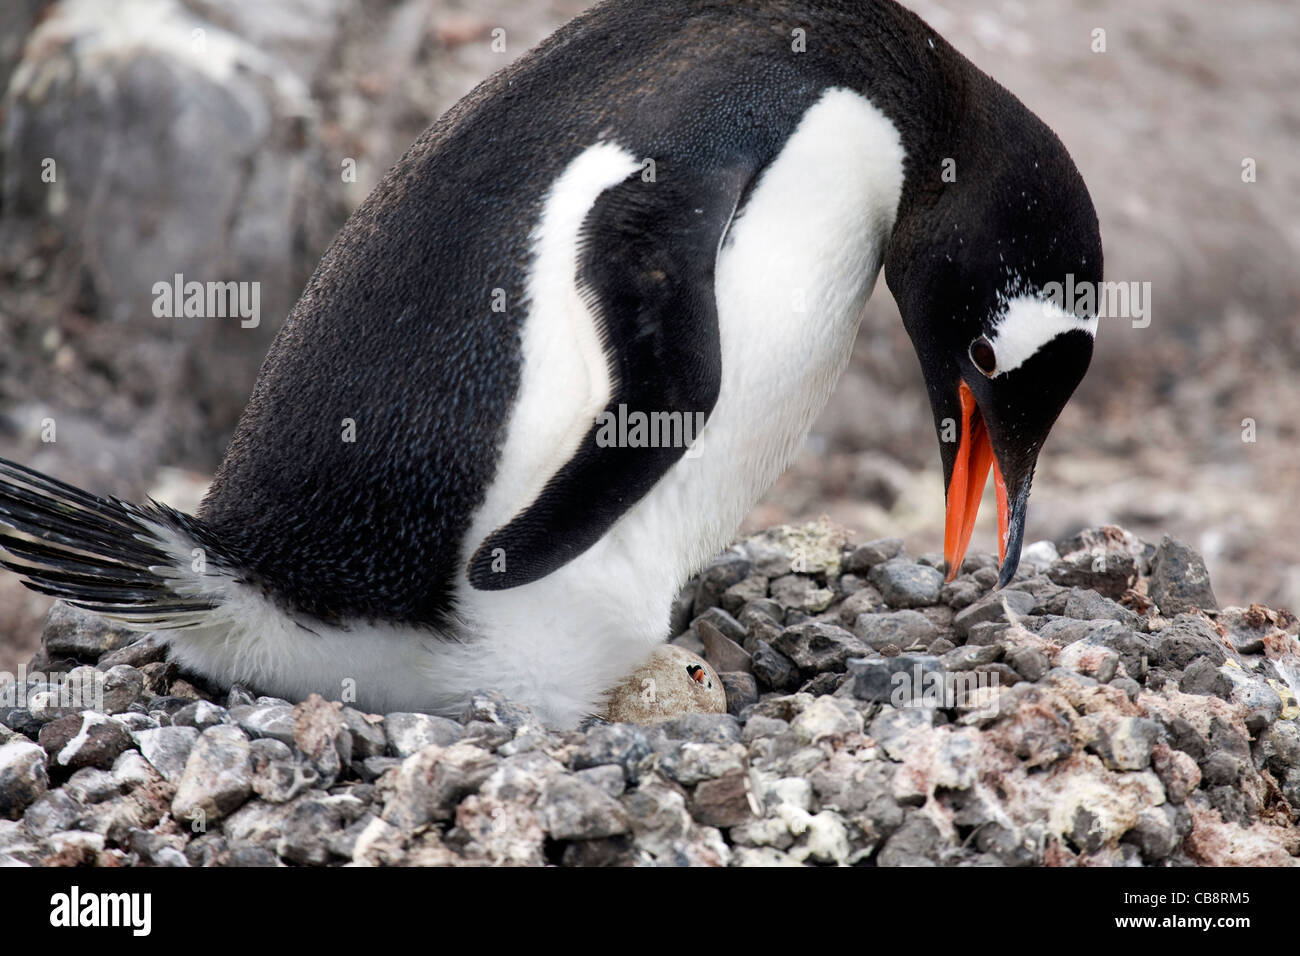 Gentoo Penguin (Pygoscelis papua) with chick hatching from egg in nest at rookery, Wiencke Island, Palmer Archipelago, Antarctic Stock Photo